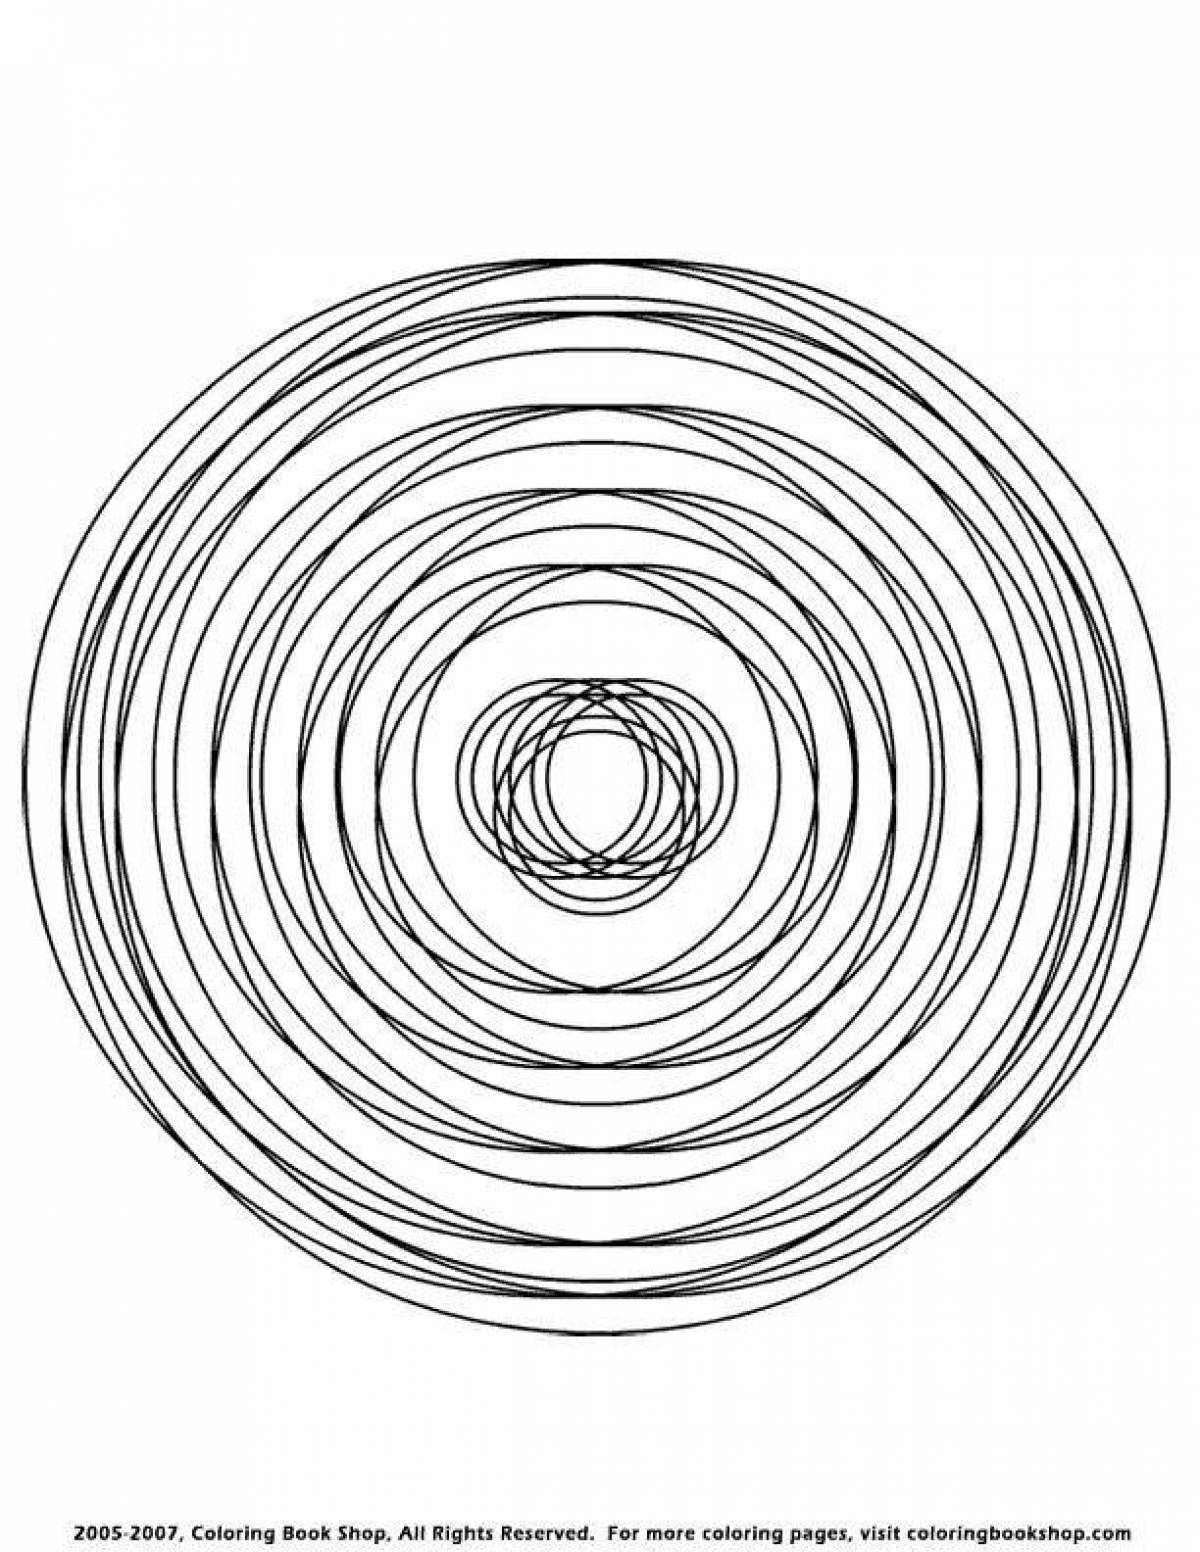 Coloring page of complex circular spiral